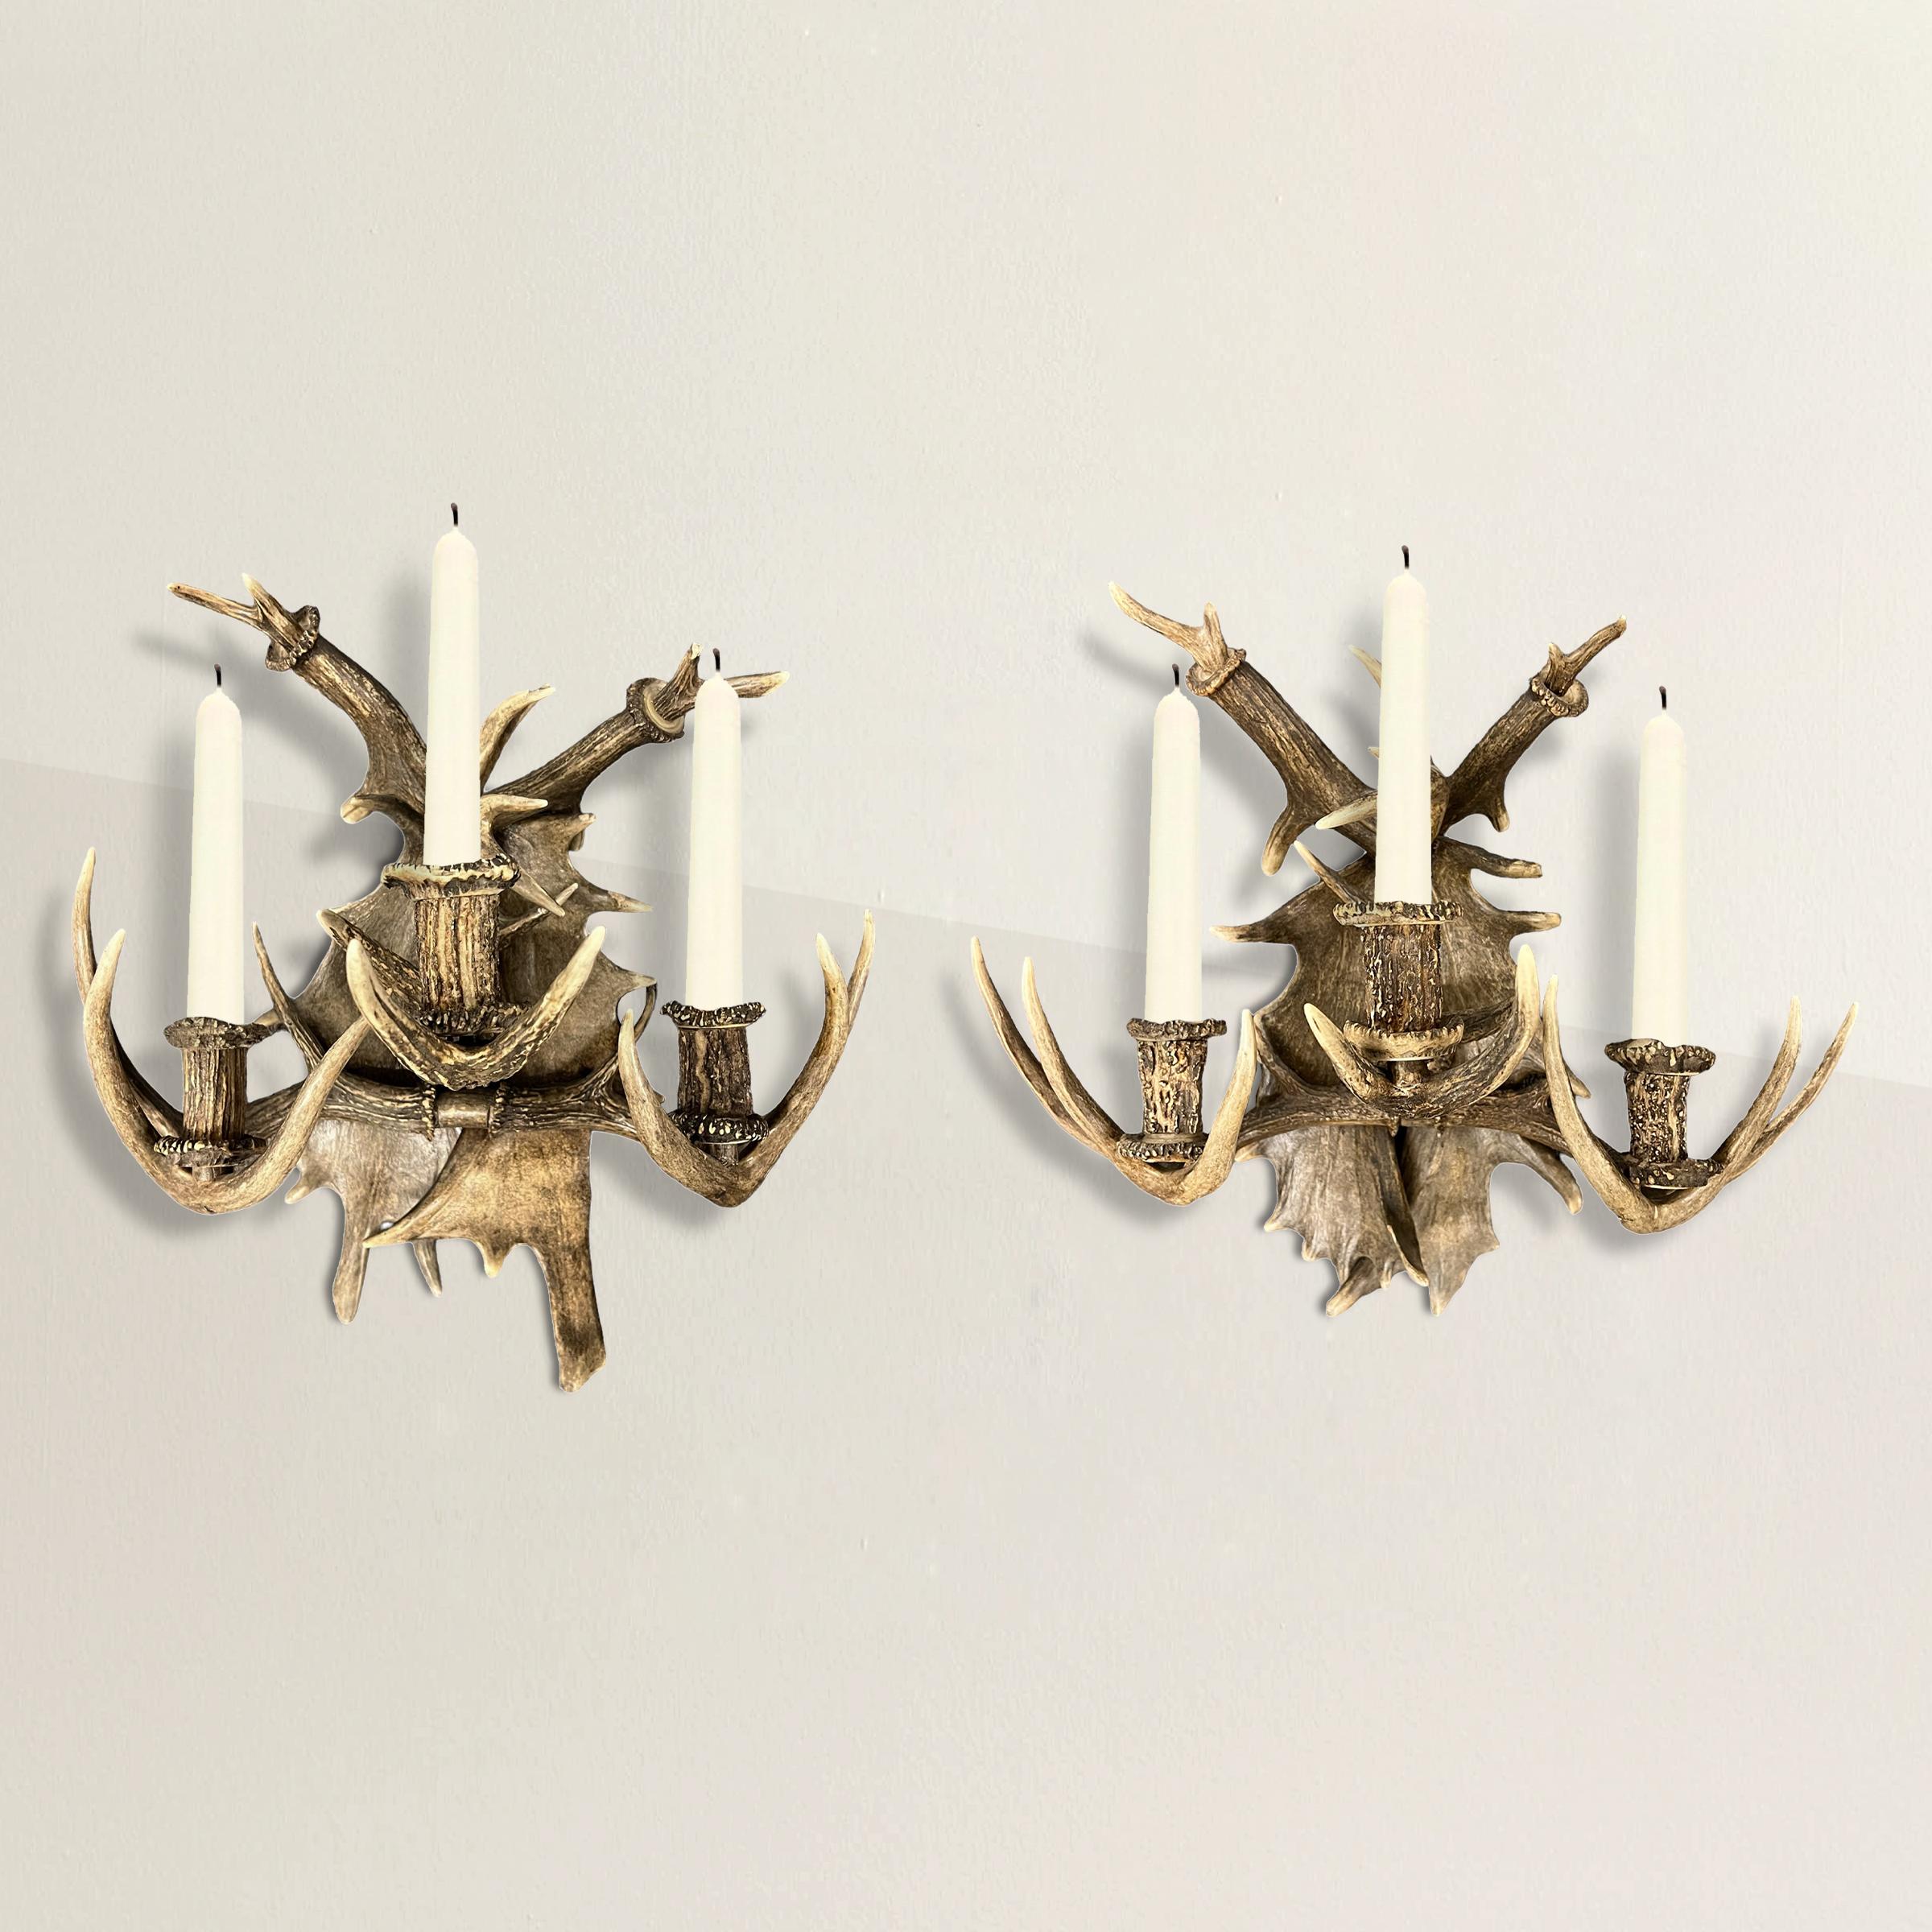 Crafted from fallow deer and stag antlers, these 20th-century German three-arm sconces stand as majestic relics of the Black Forest's heritage. Likely adorning the walls of a hunting lodge while flanking grand paintings or mirrors, their impressive